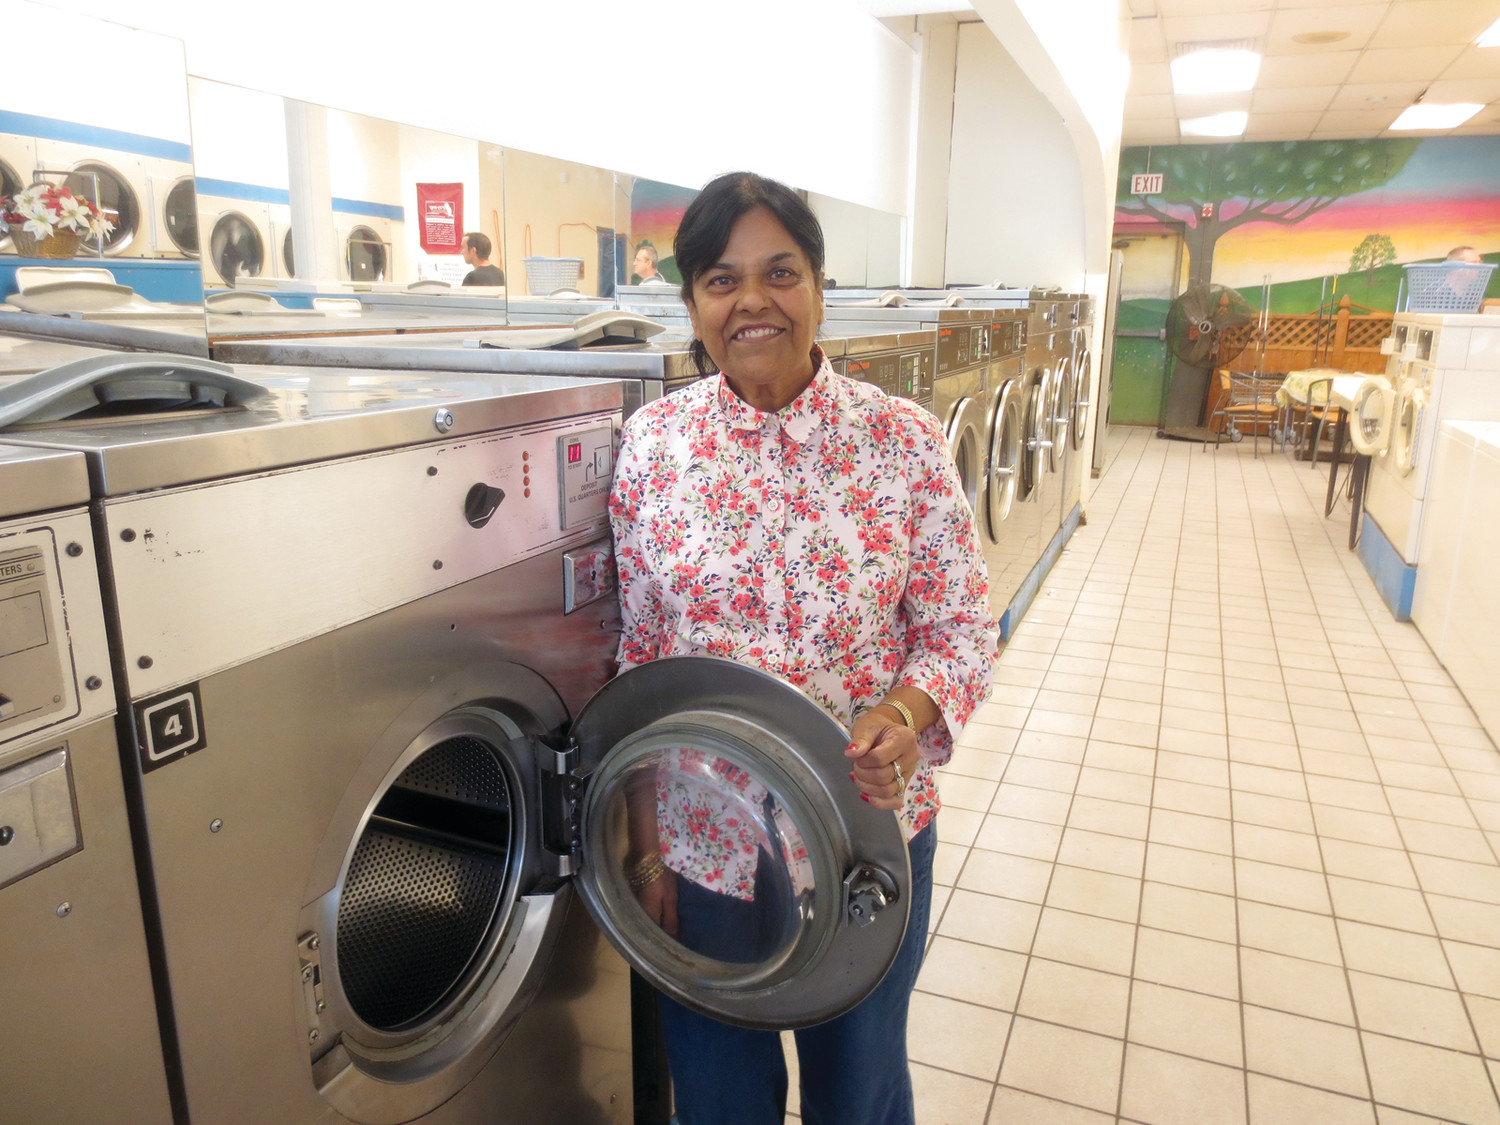 Meet Kaushal Jain, co-owner of Jain’s Laundry ~ a fully-equipped laundromat on Route 44 where customers can do their own wash or take advantage of Kaushal’s meticulous wash/dry and fold services.